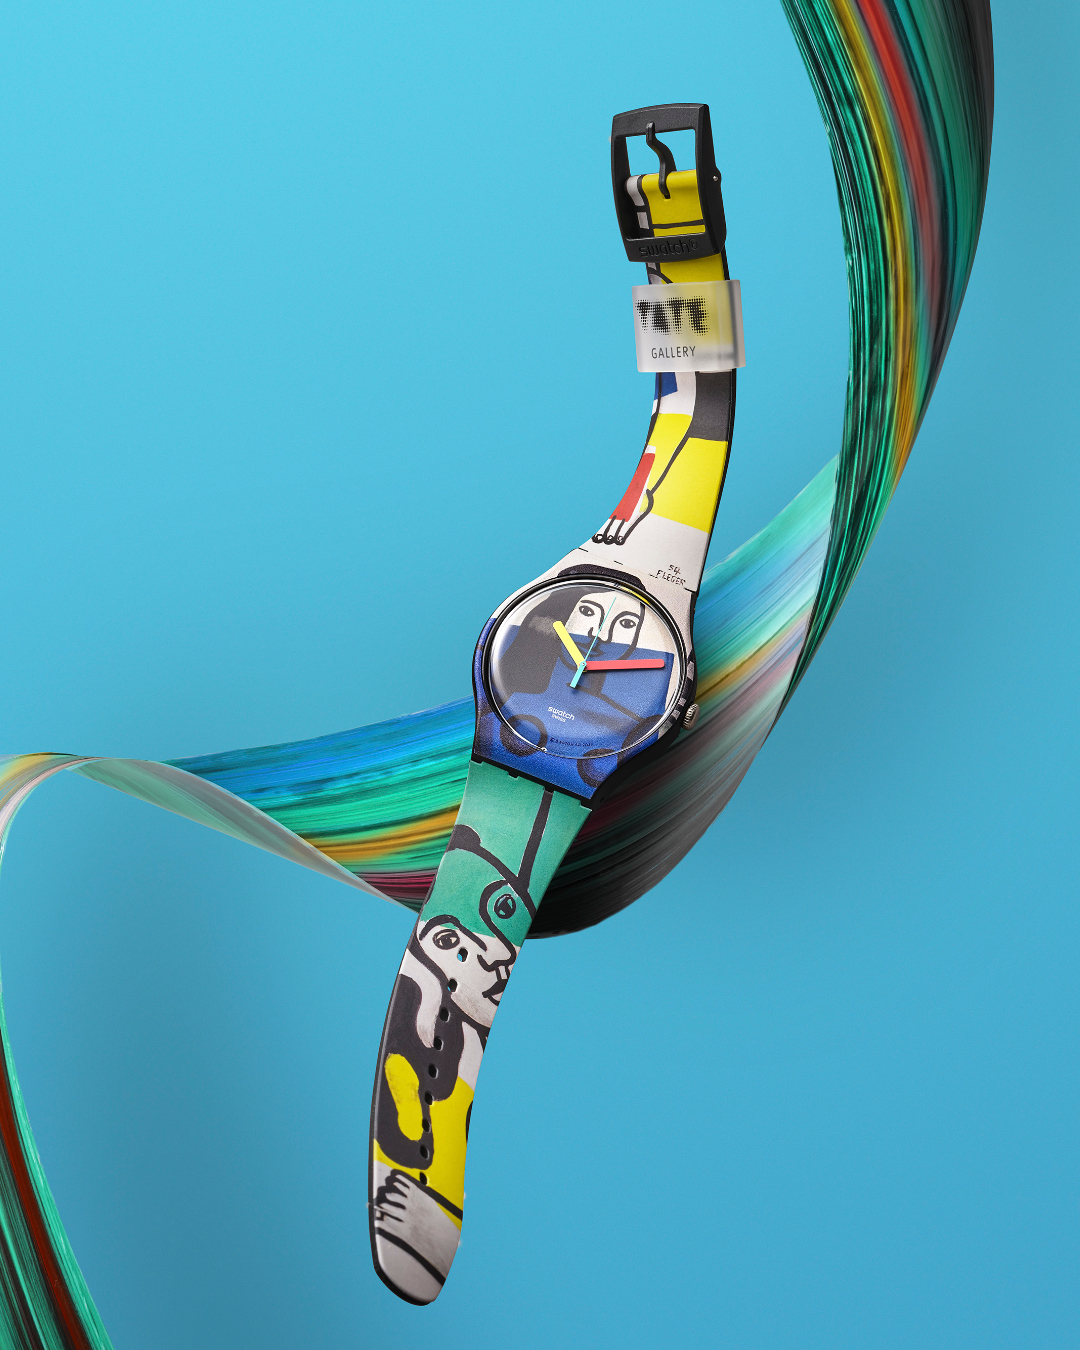 An artistically decorated watch in a green and blue colourway against a matching background